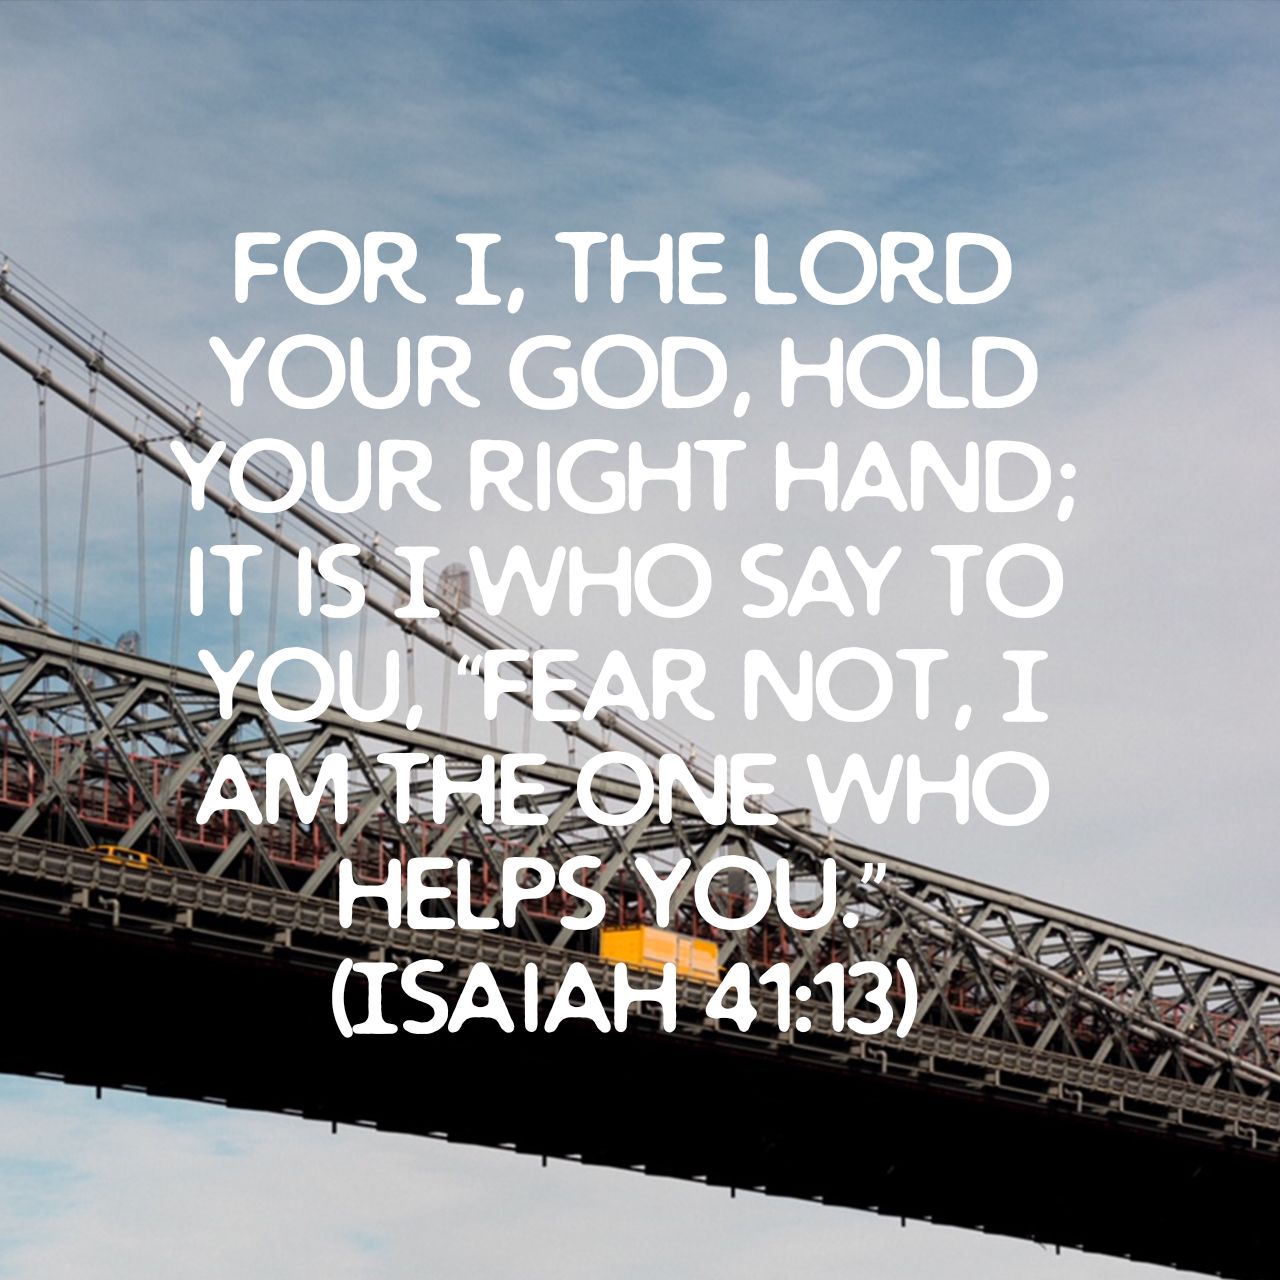 For I, THE LORD YOUR GOD, HOLD YOUR RIGHT HAND; ITNSWHO SAY TO YoU FEAR NOT, I AMTHEONE WHO HELPS YOU (ISAIAH 41:13)